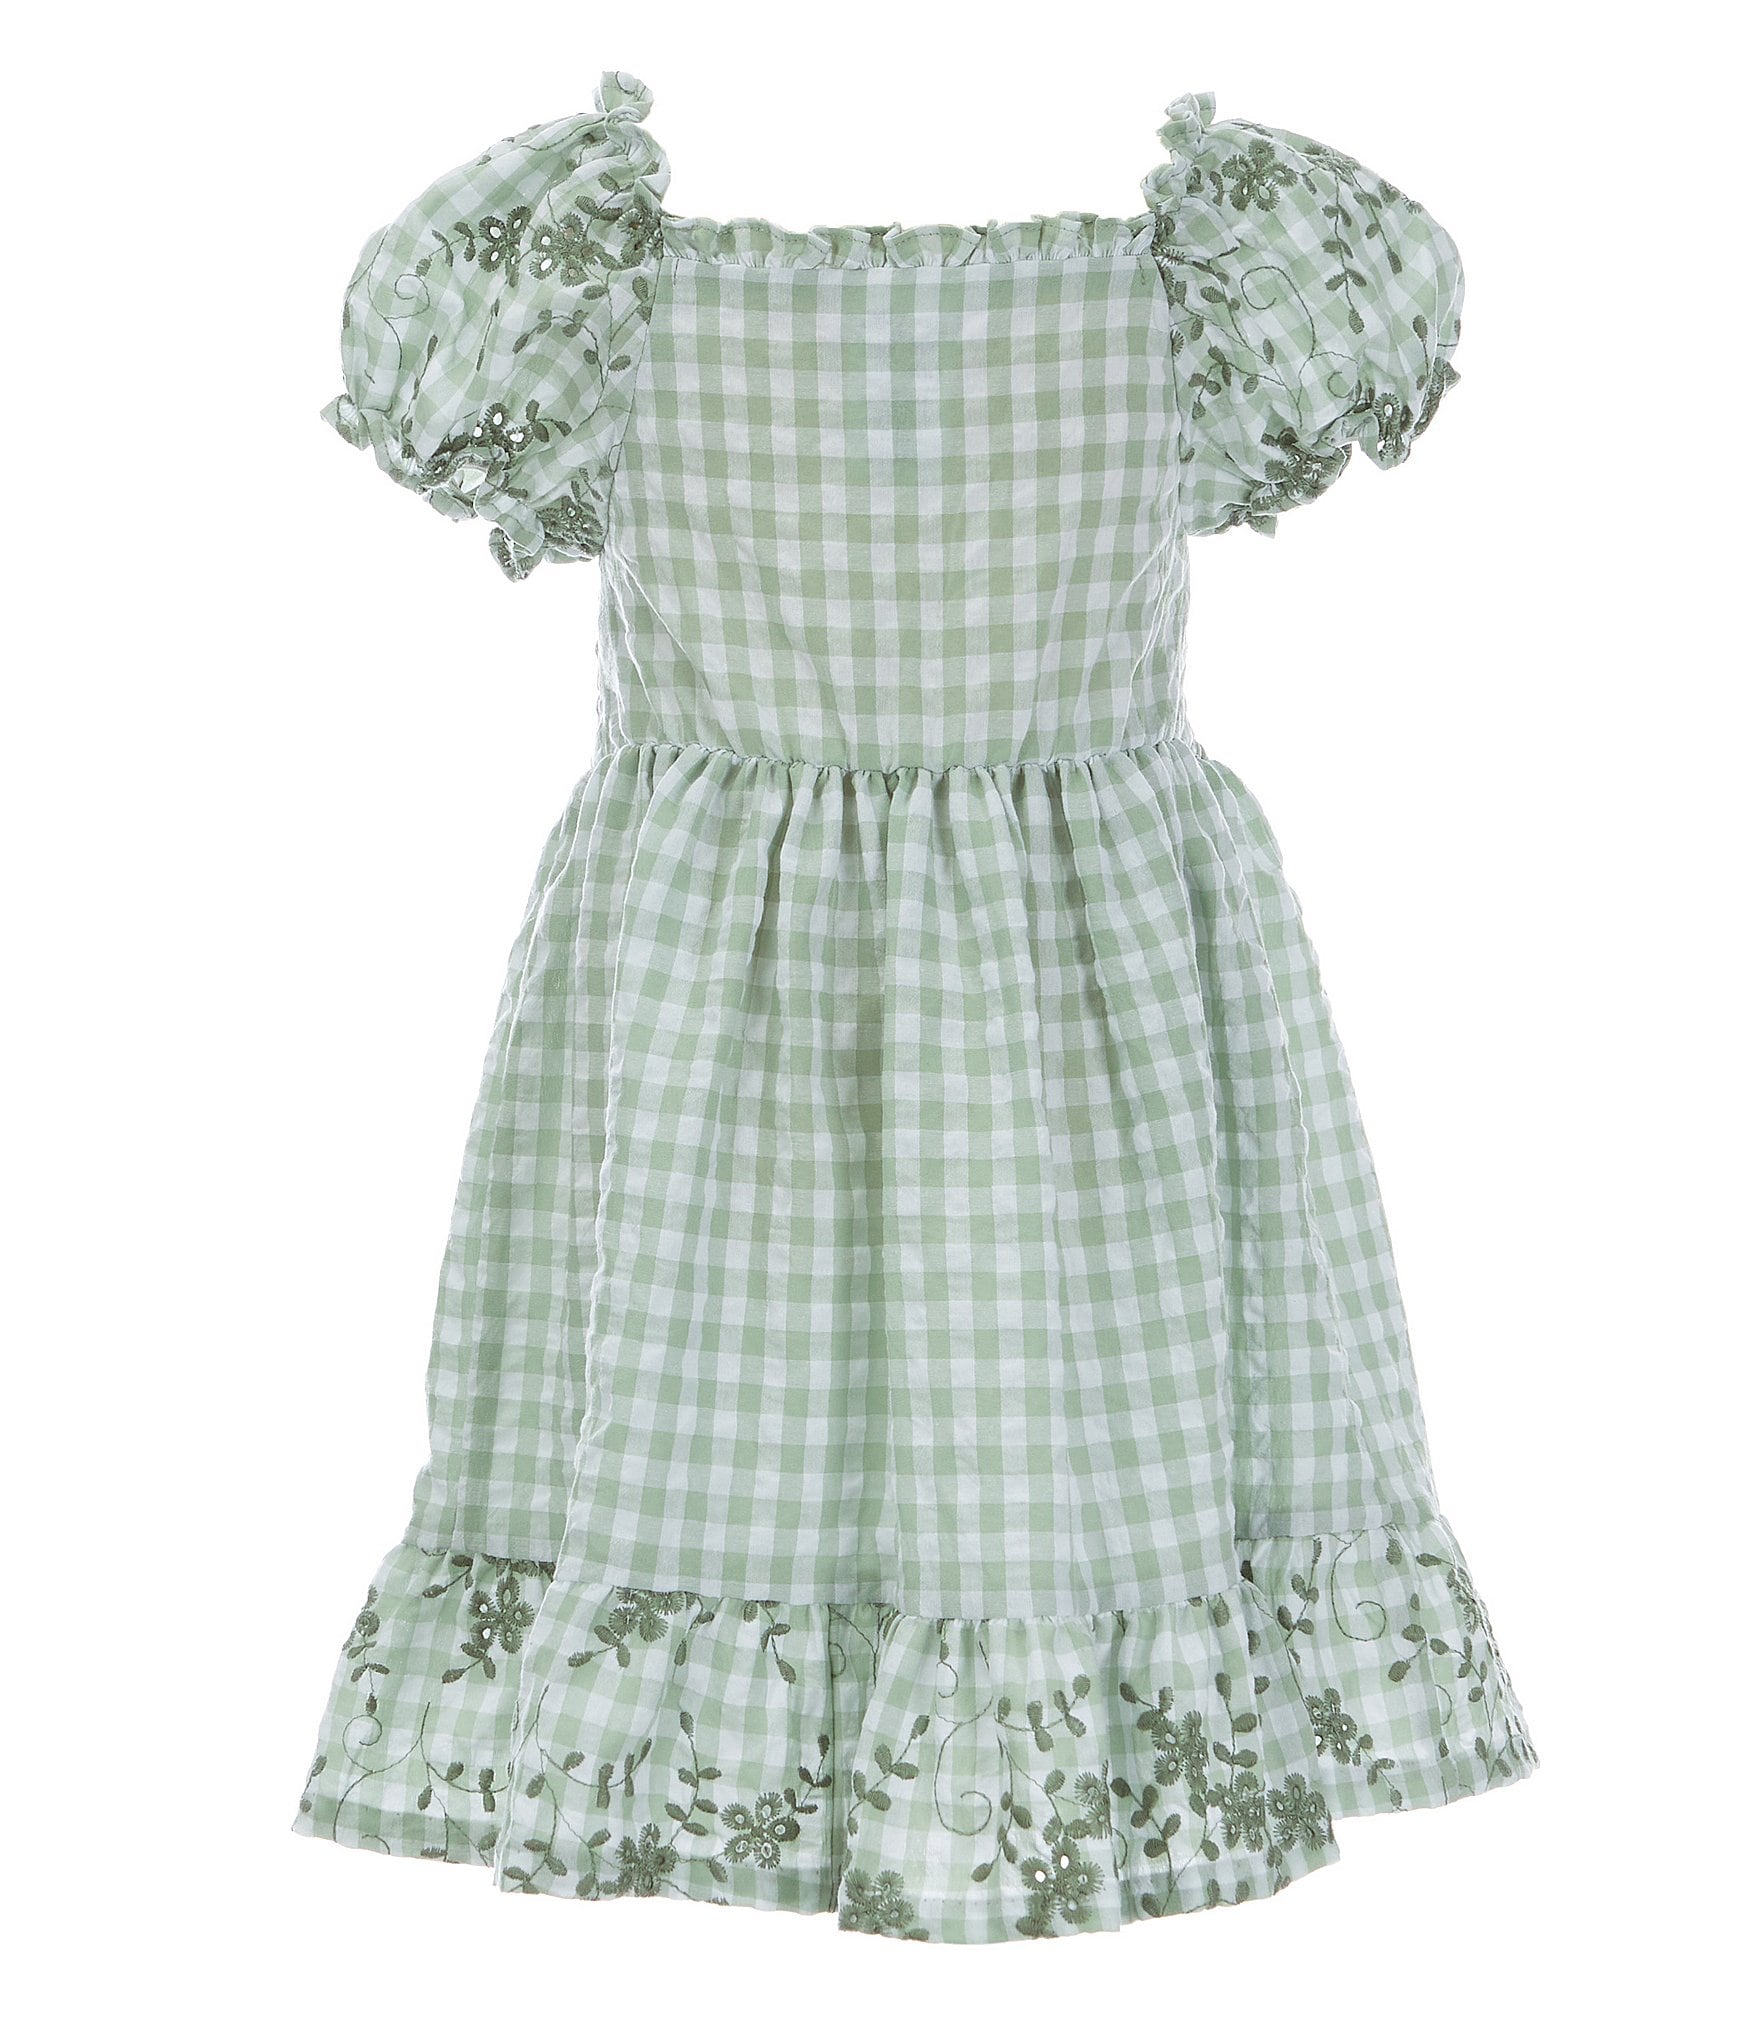 Bonnie Jean Little Girls 2T-6X Short-Sleeve Embroidered/Checked Peasant ...